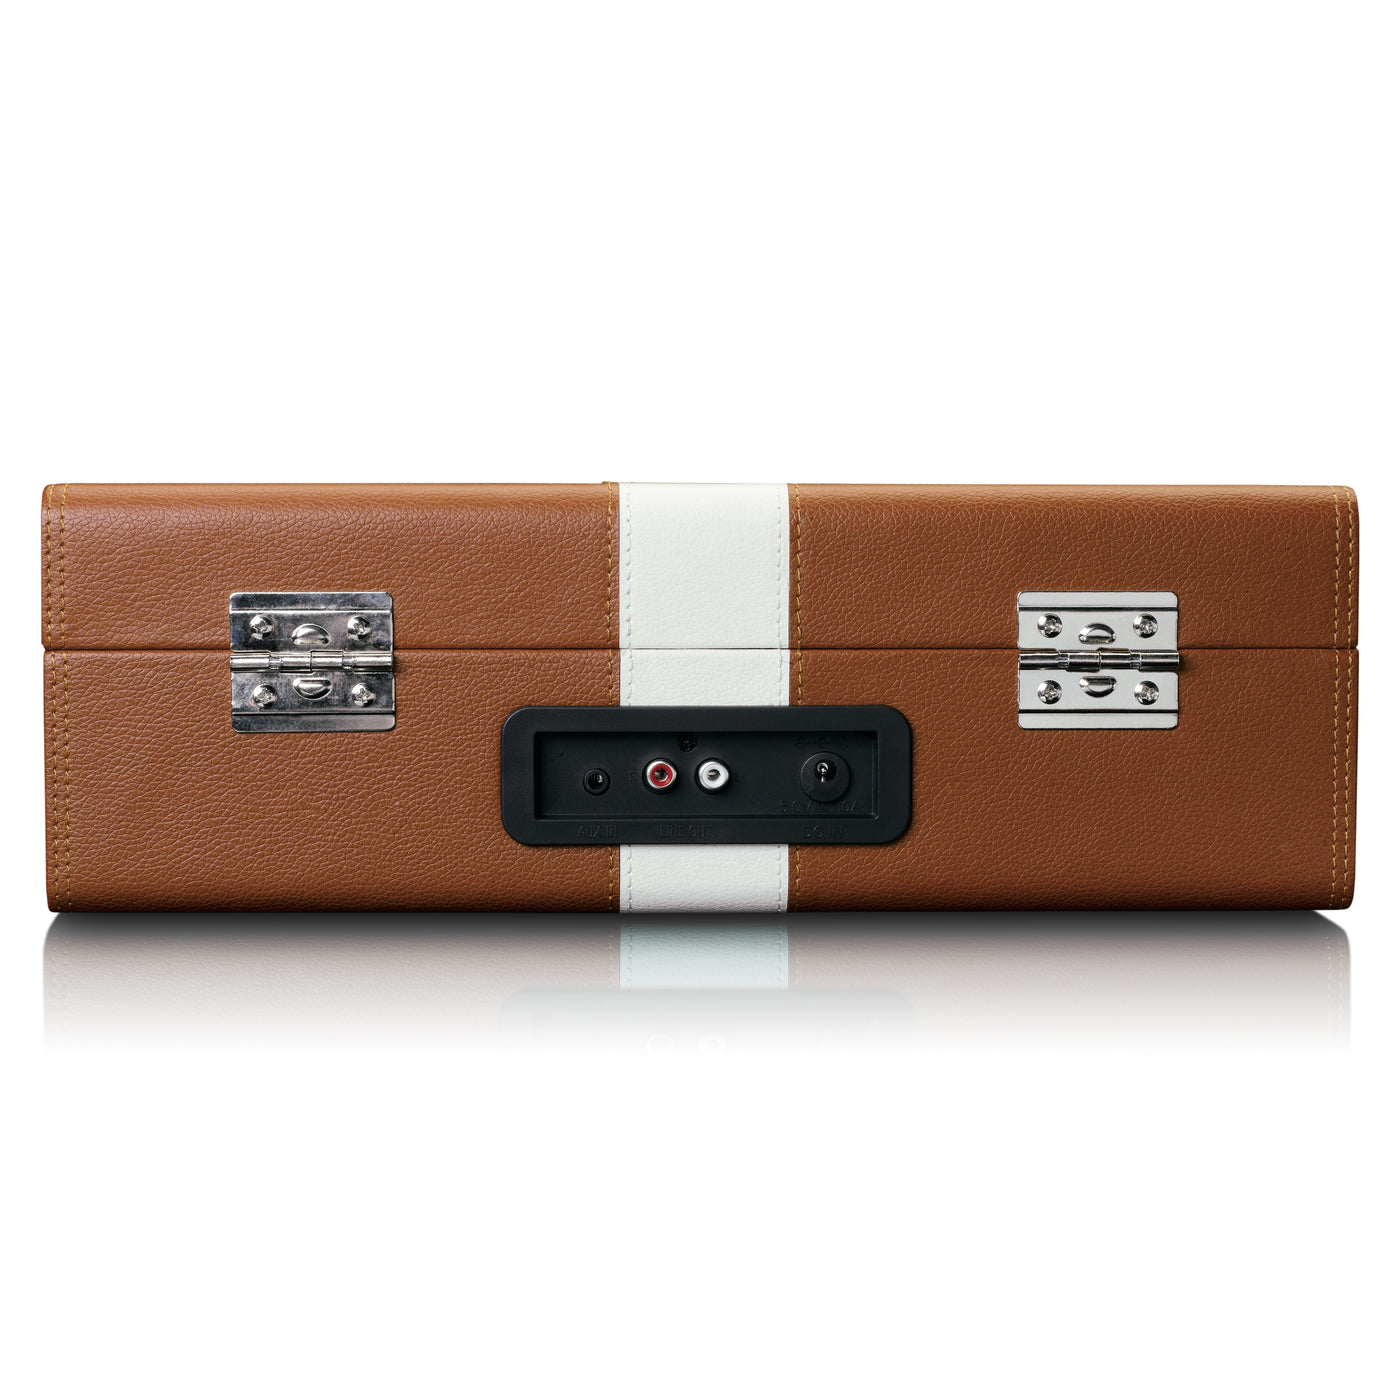 CLASSIC PHONO TT-120BNWH -  Turntable with Bluetooth® reception and built-in speakers and rechargeable battery - Brown/White